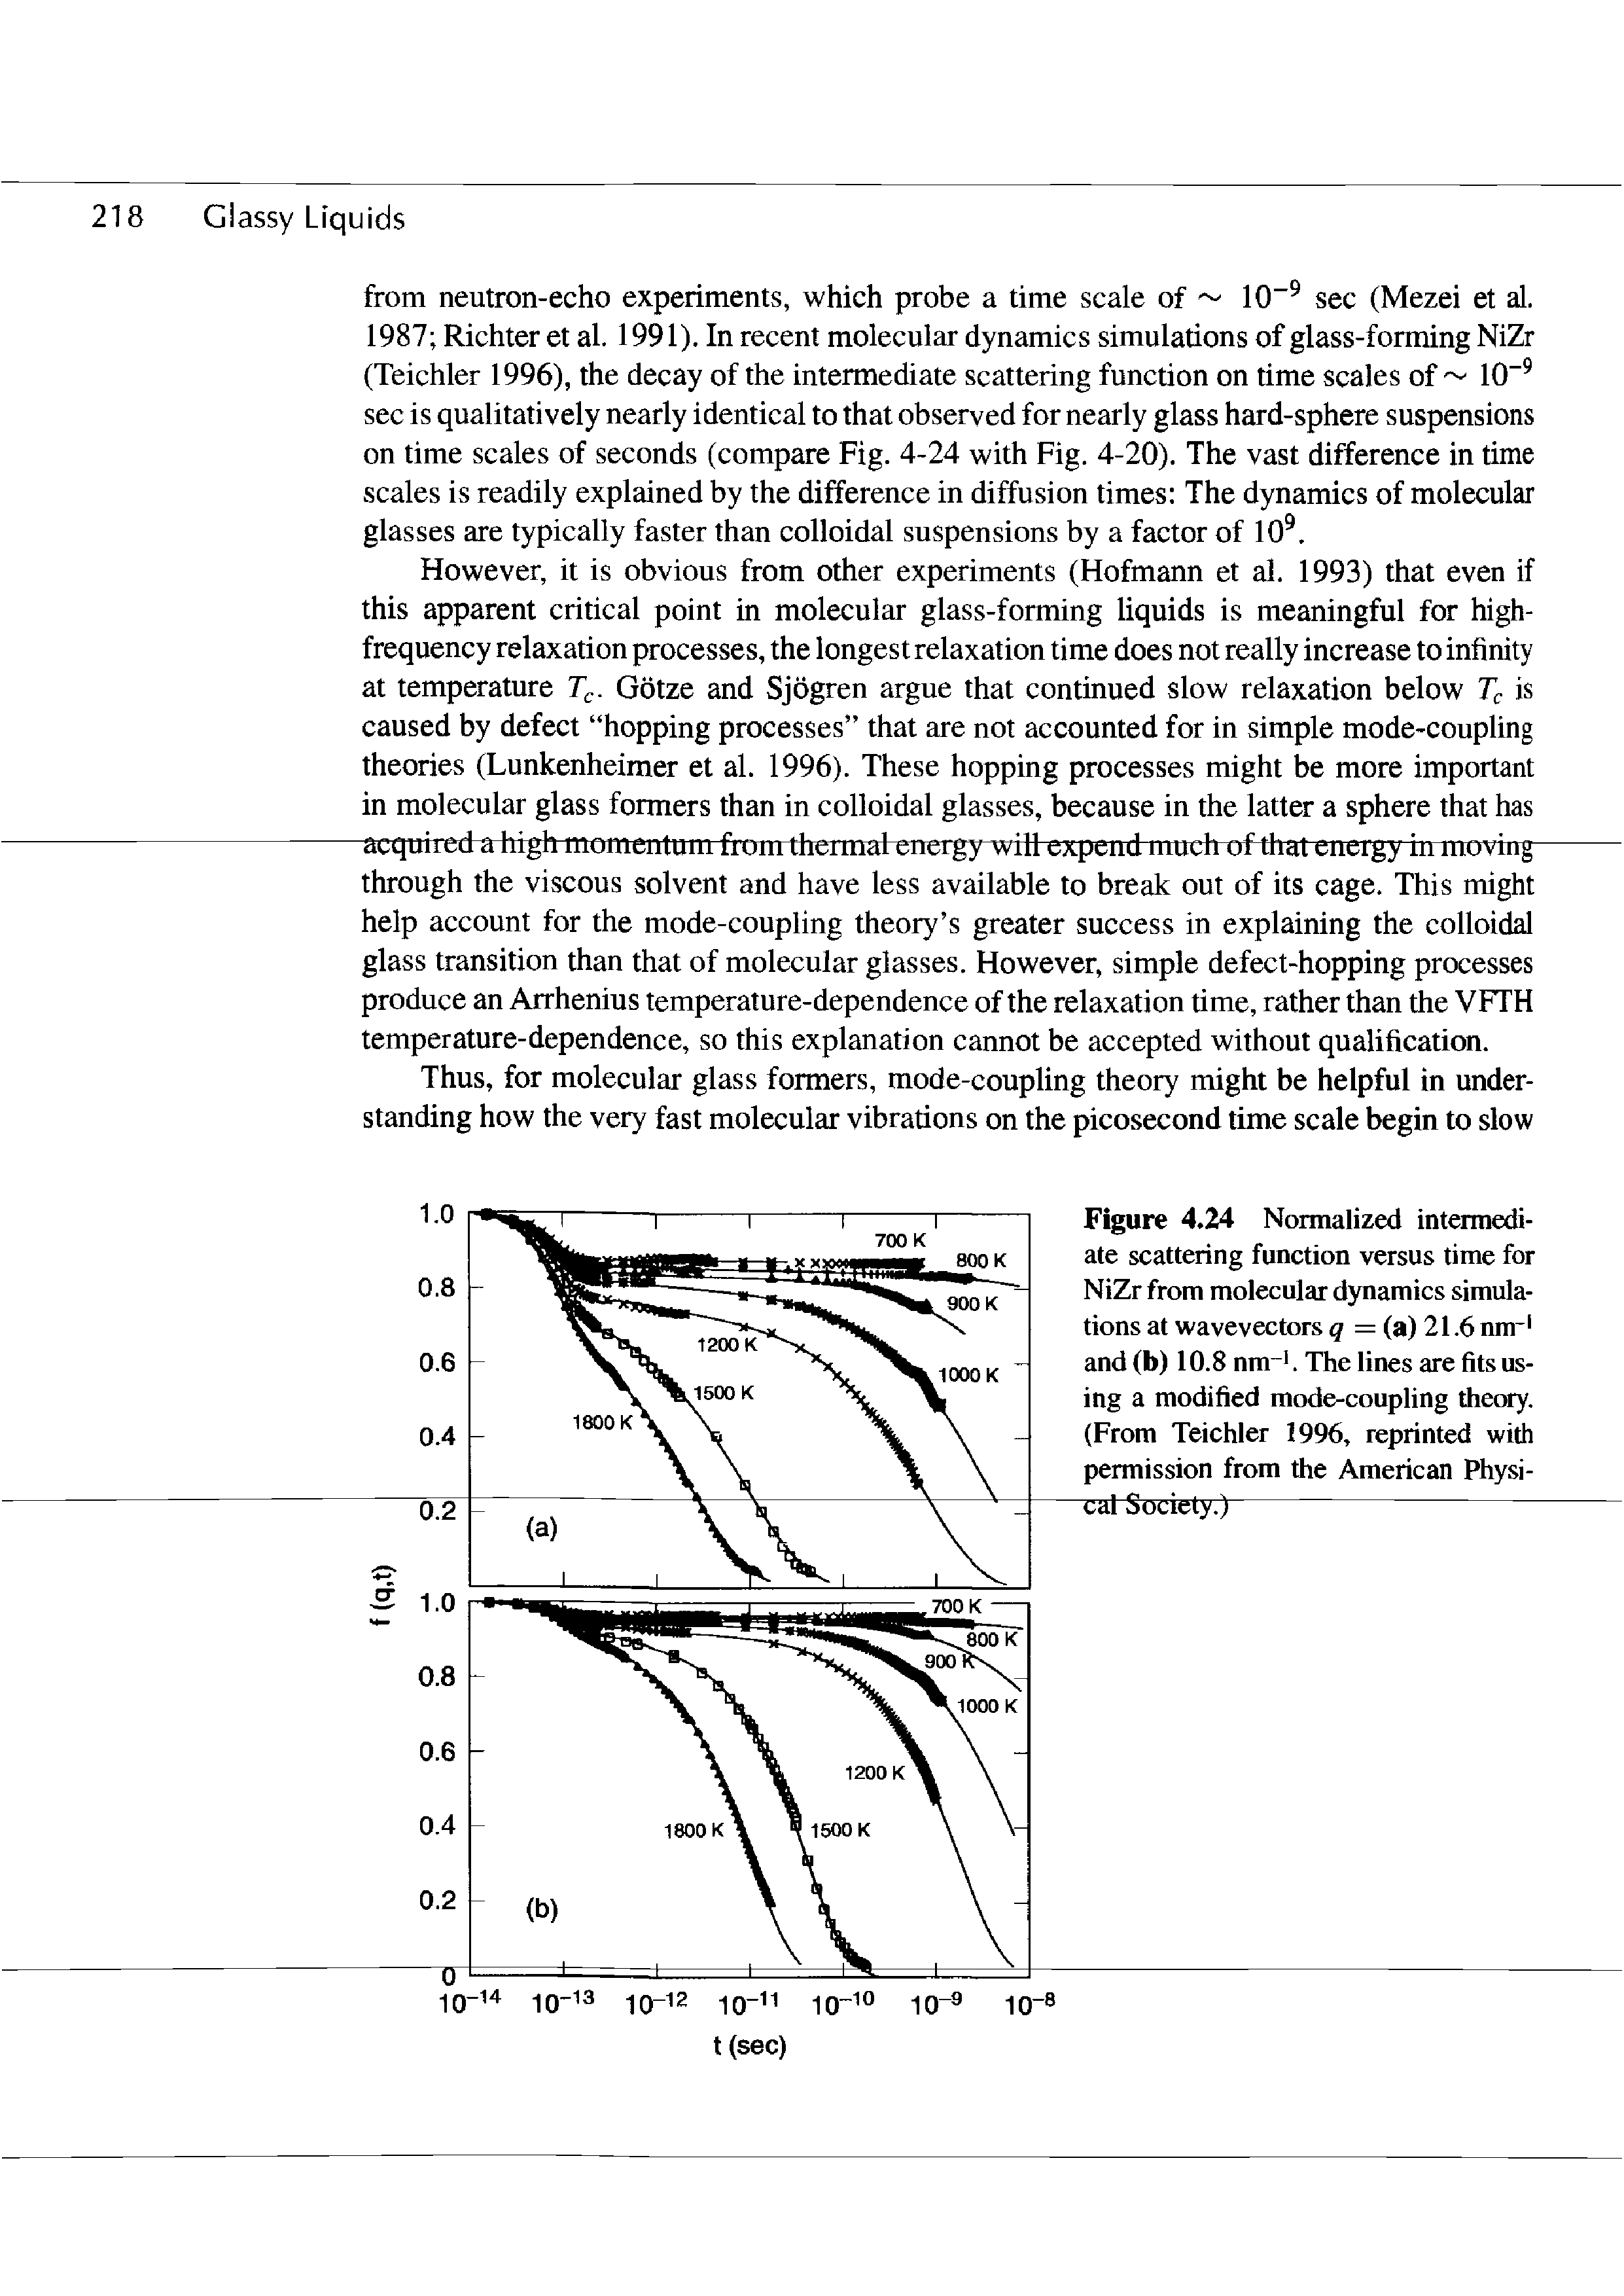 Figure 4.24 Normalized intermediate scattering function versus time for NiZr from molecular d)uiamics simulations at wavevectors q = (a) 21.6 nm- and (b) 10.8 nm. The lines are fits using a modified mode-coupling theory. (From Teichler 1996, reprinted with permission from the American Physi-cal Society.)...